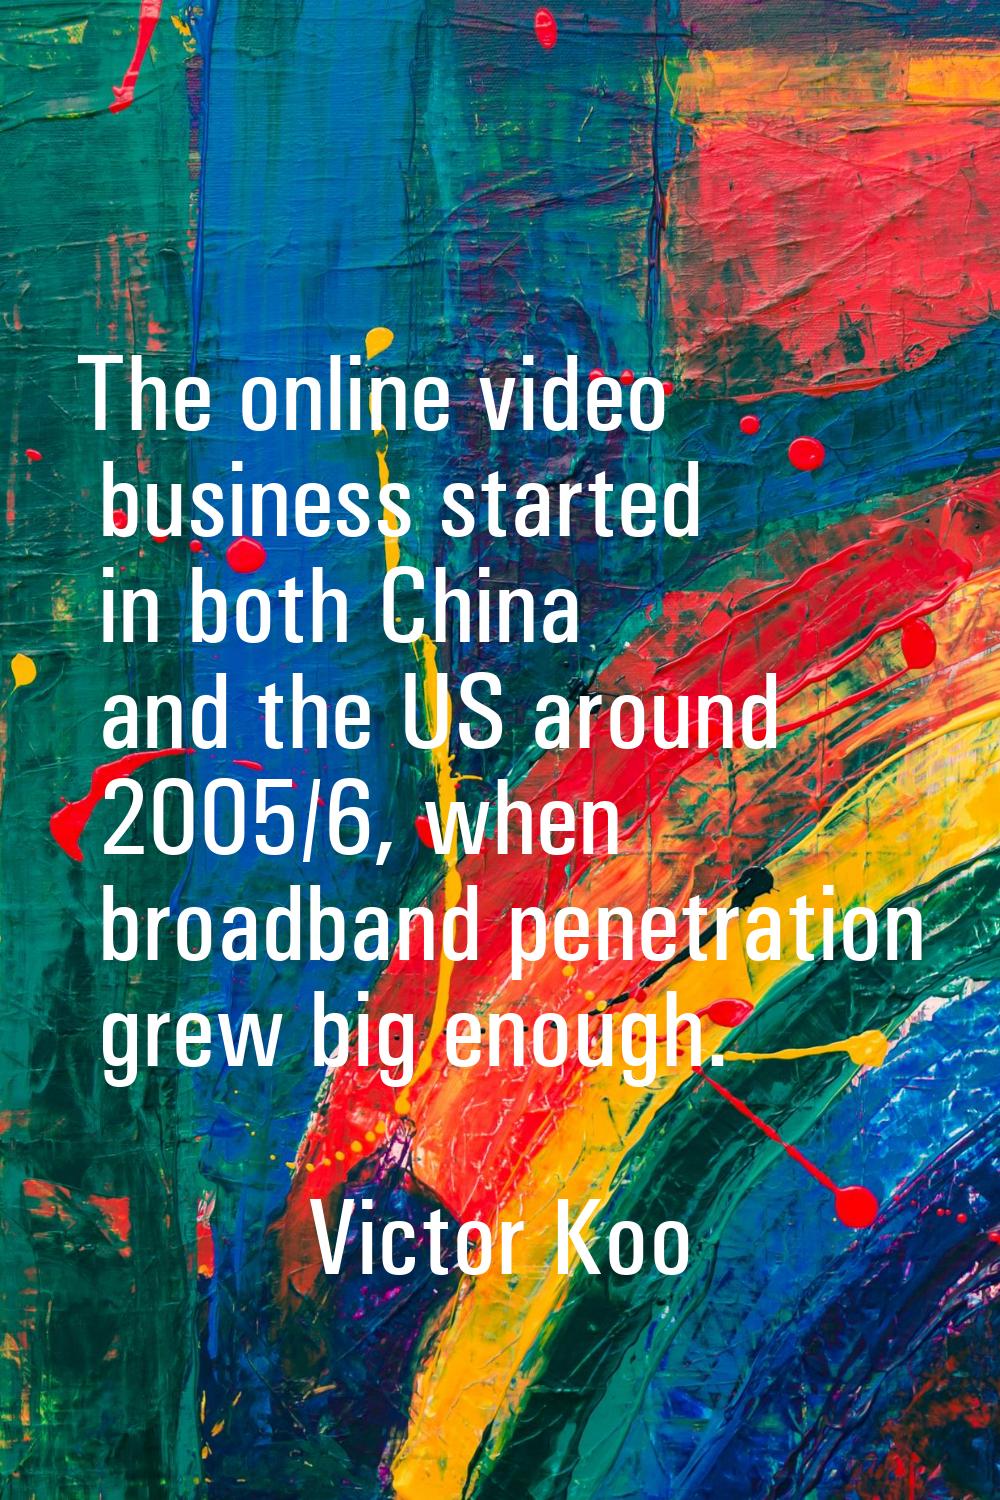 The online video business started in both China and the US around 2005/6, when broadband penetratio